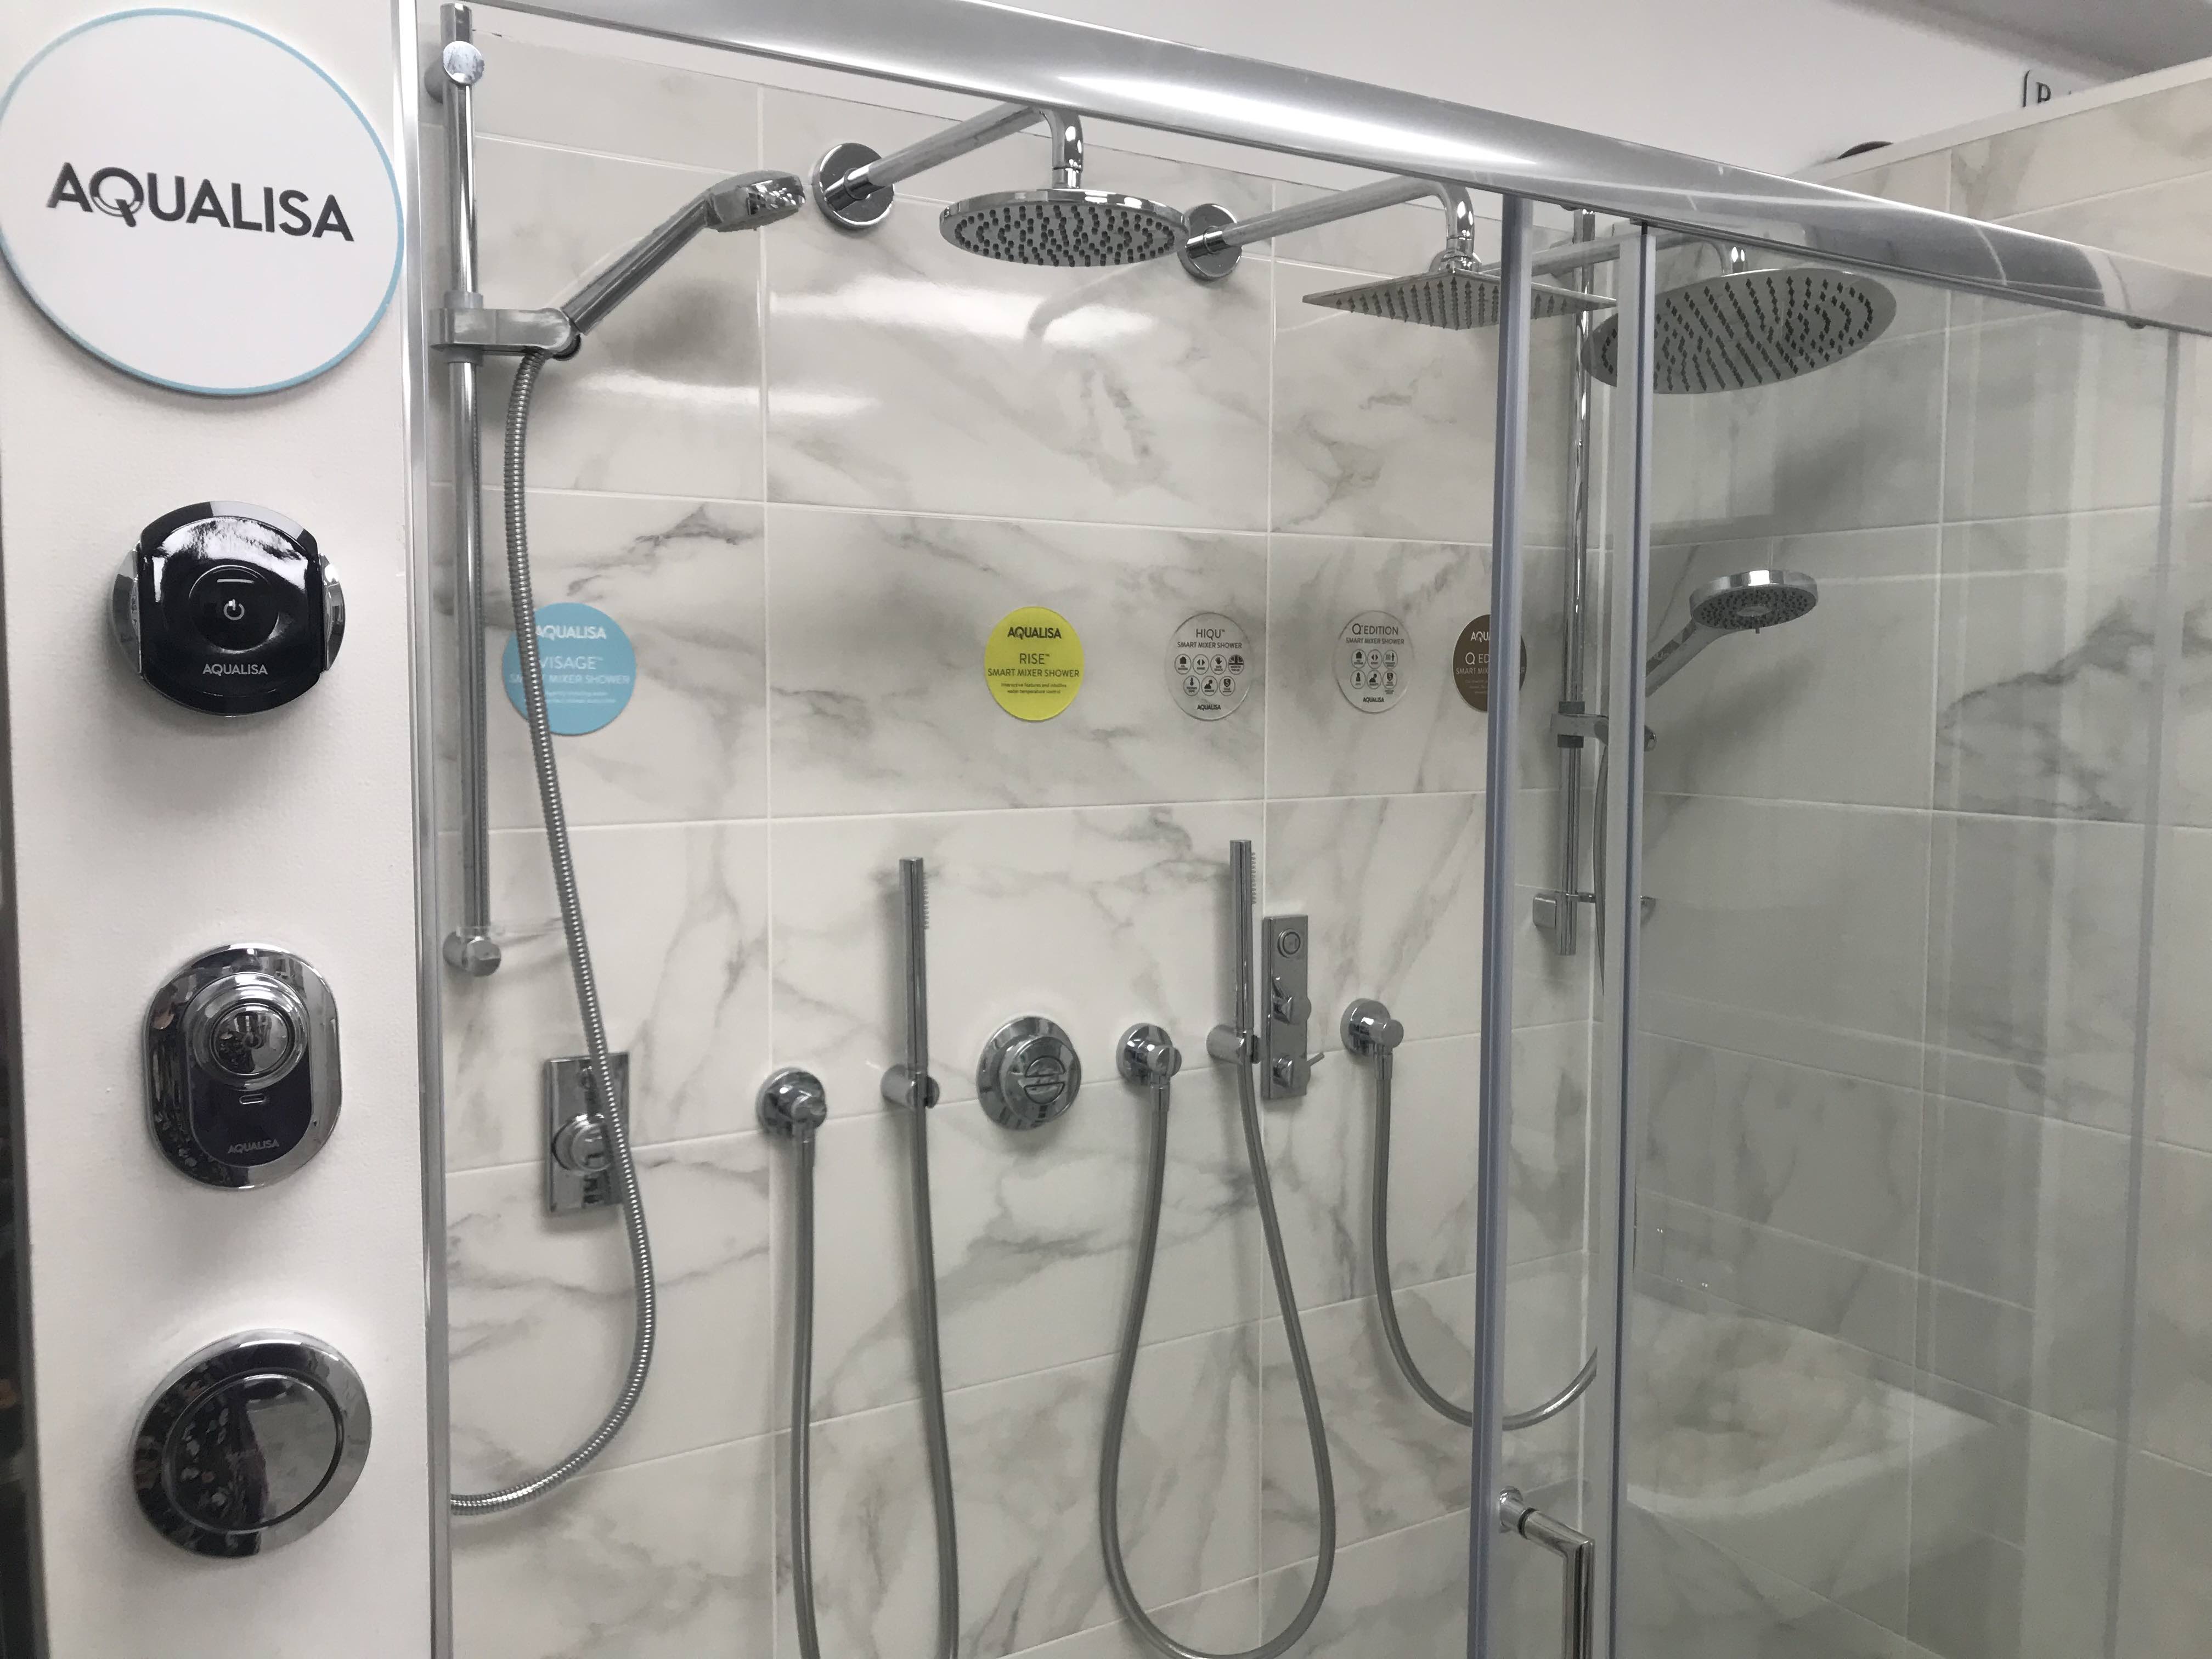 With numerous working shower displays, clients can be confident of choosing something that suits.